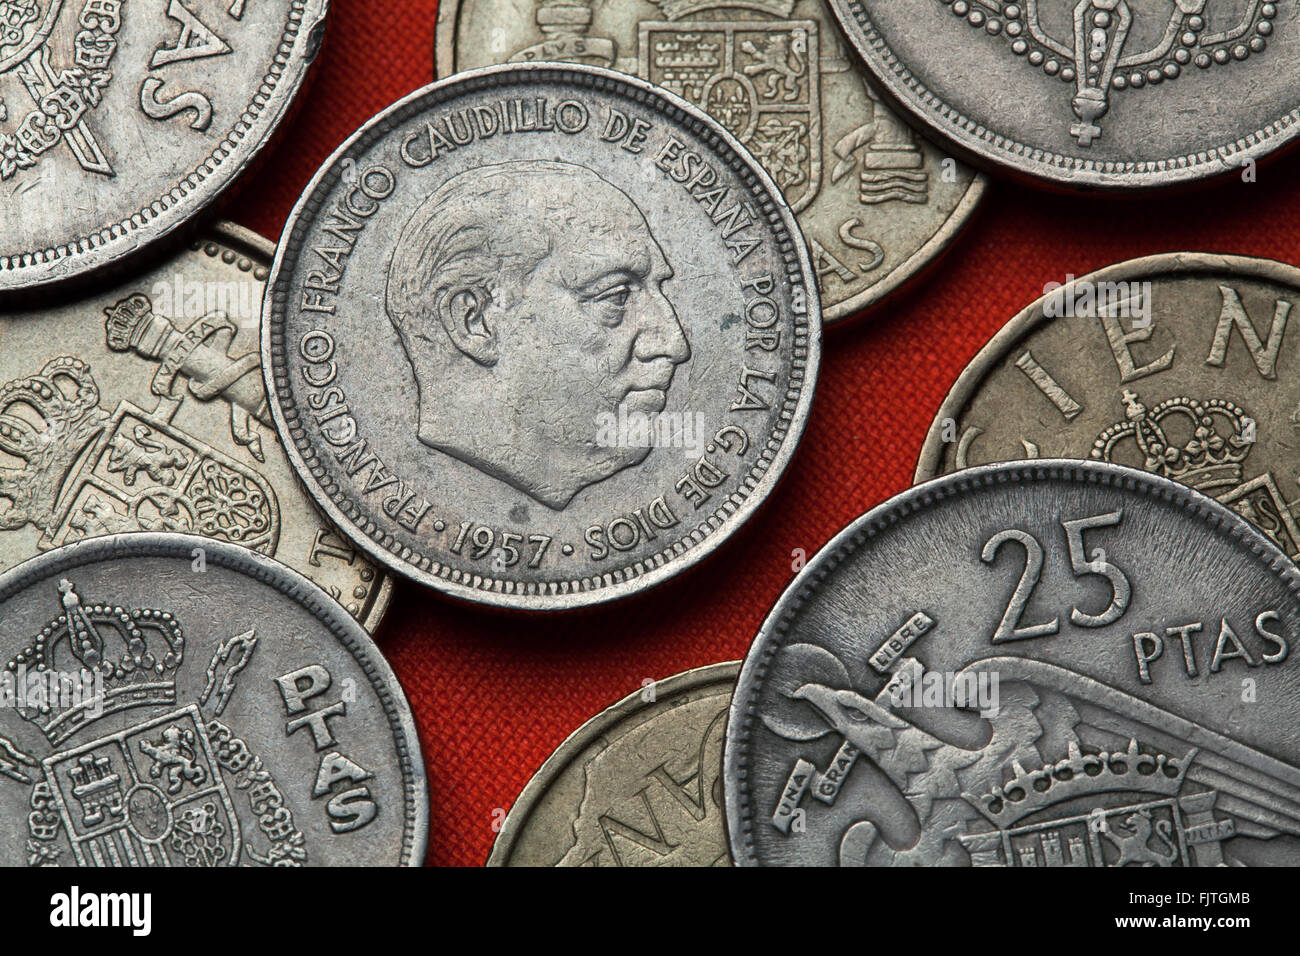 Coins of Spain. Spanish dictator Francisco Franco depicted in the Spanish five peseta coin (1957). Stock Photo